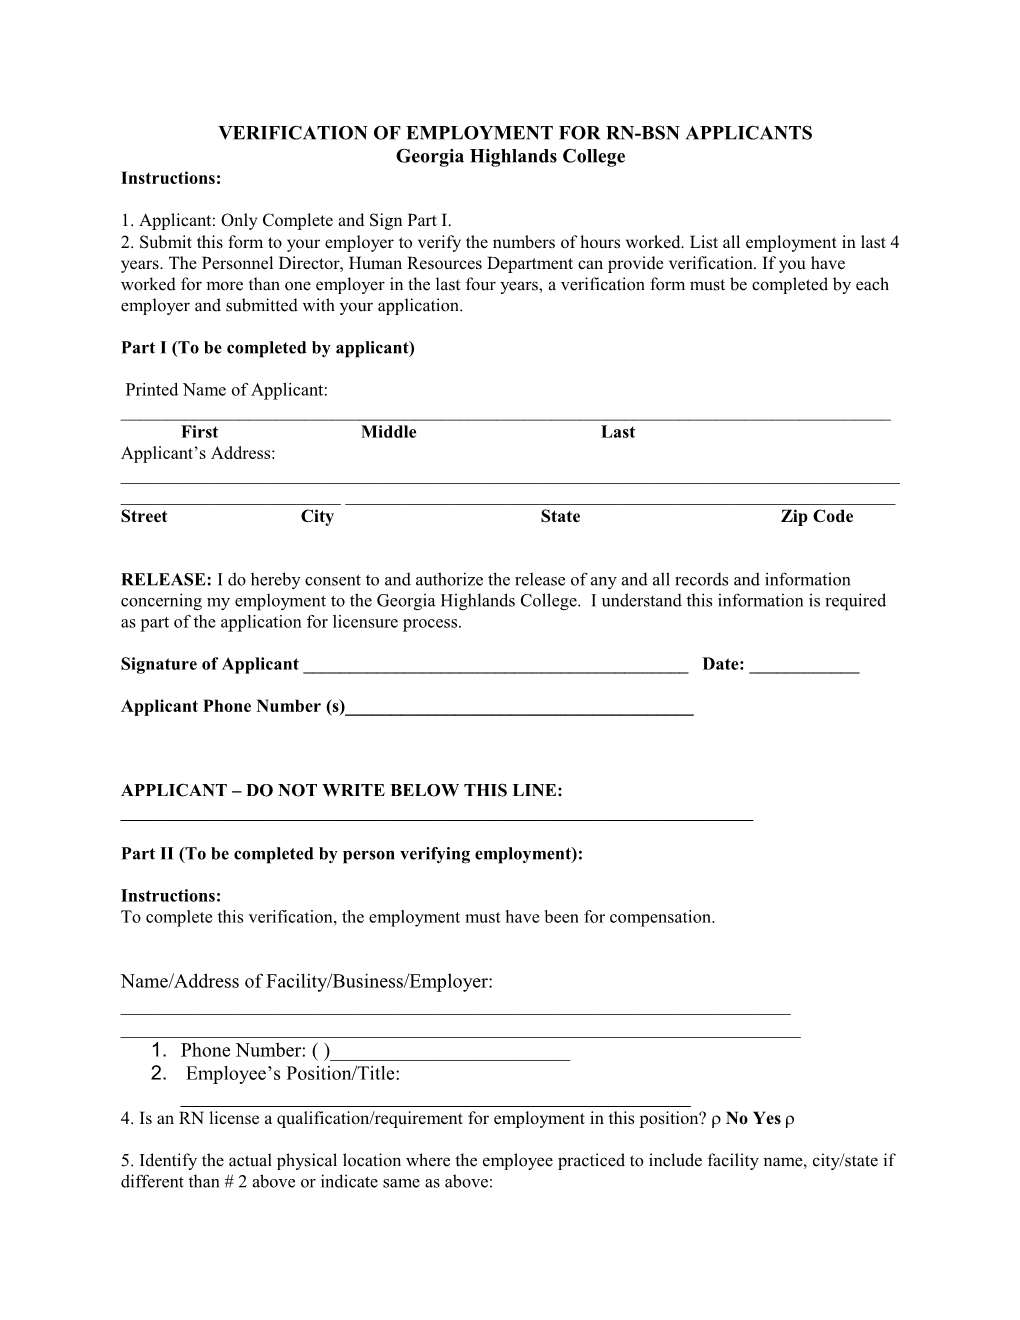 VERIFICATION of EMPLOYMENT for RN-BSN APPLICANTS Georgia Highlands College